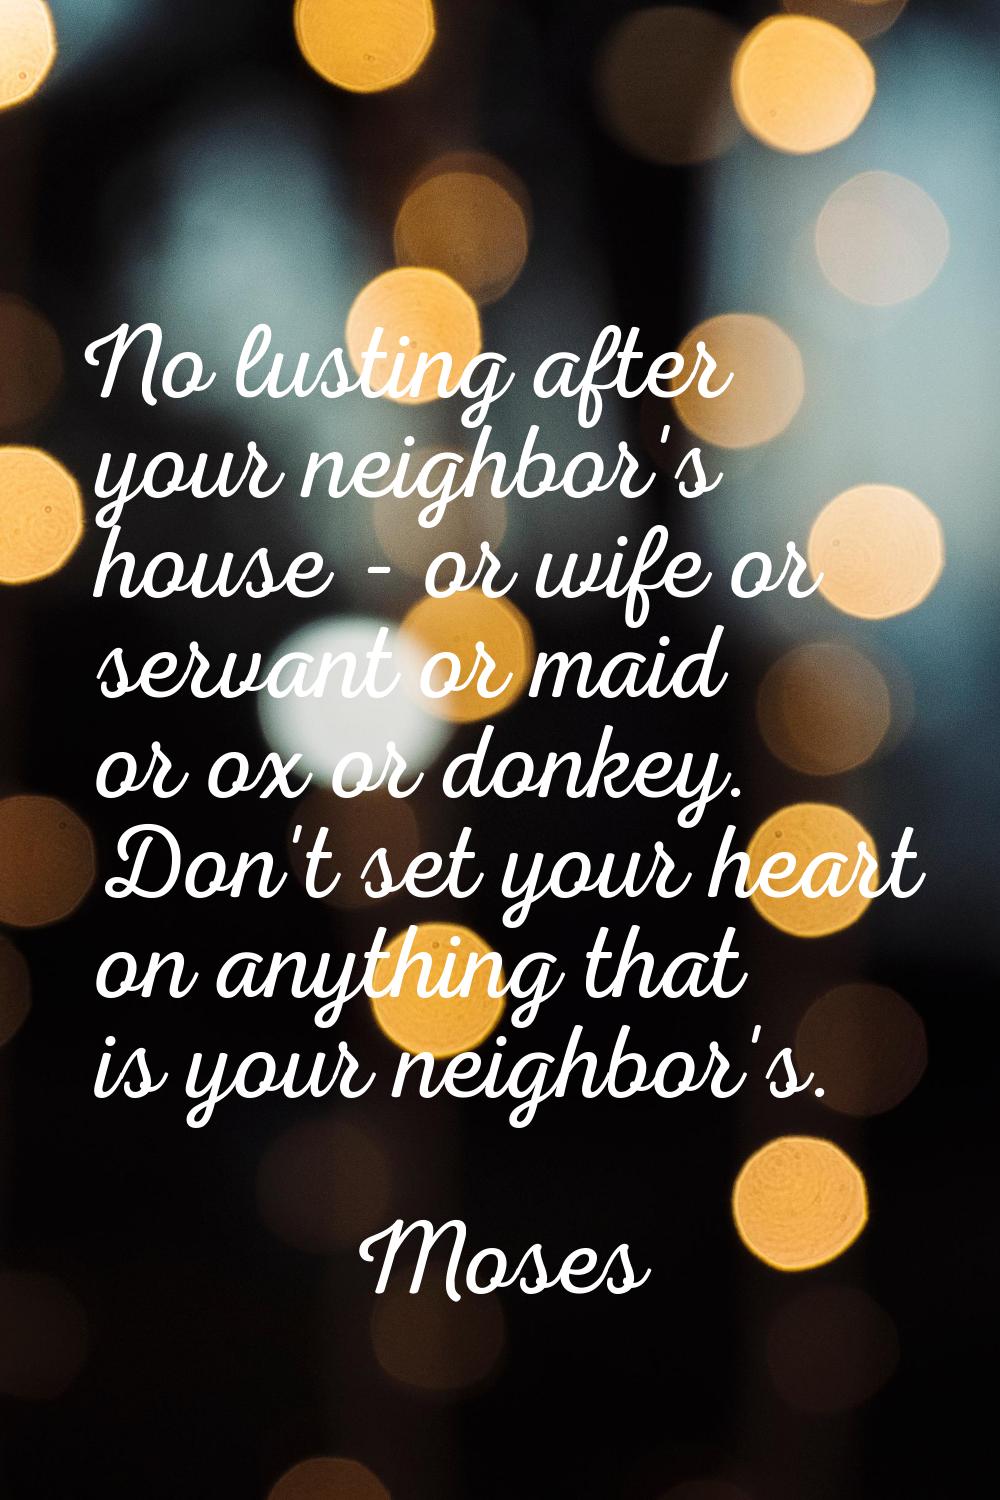 No lusting after your neighbor's house - or wife or servant or maid or ox or donkey. Don't set your